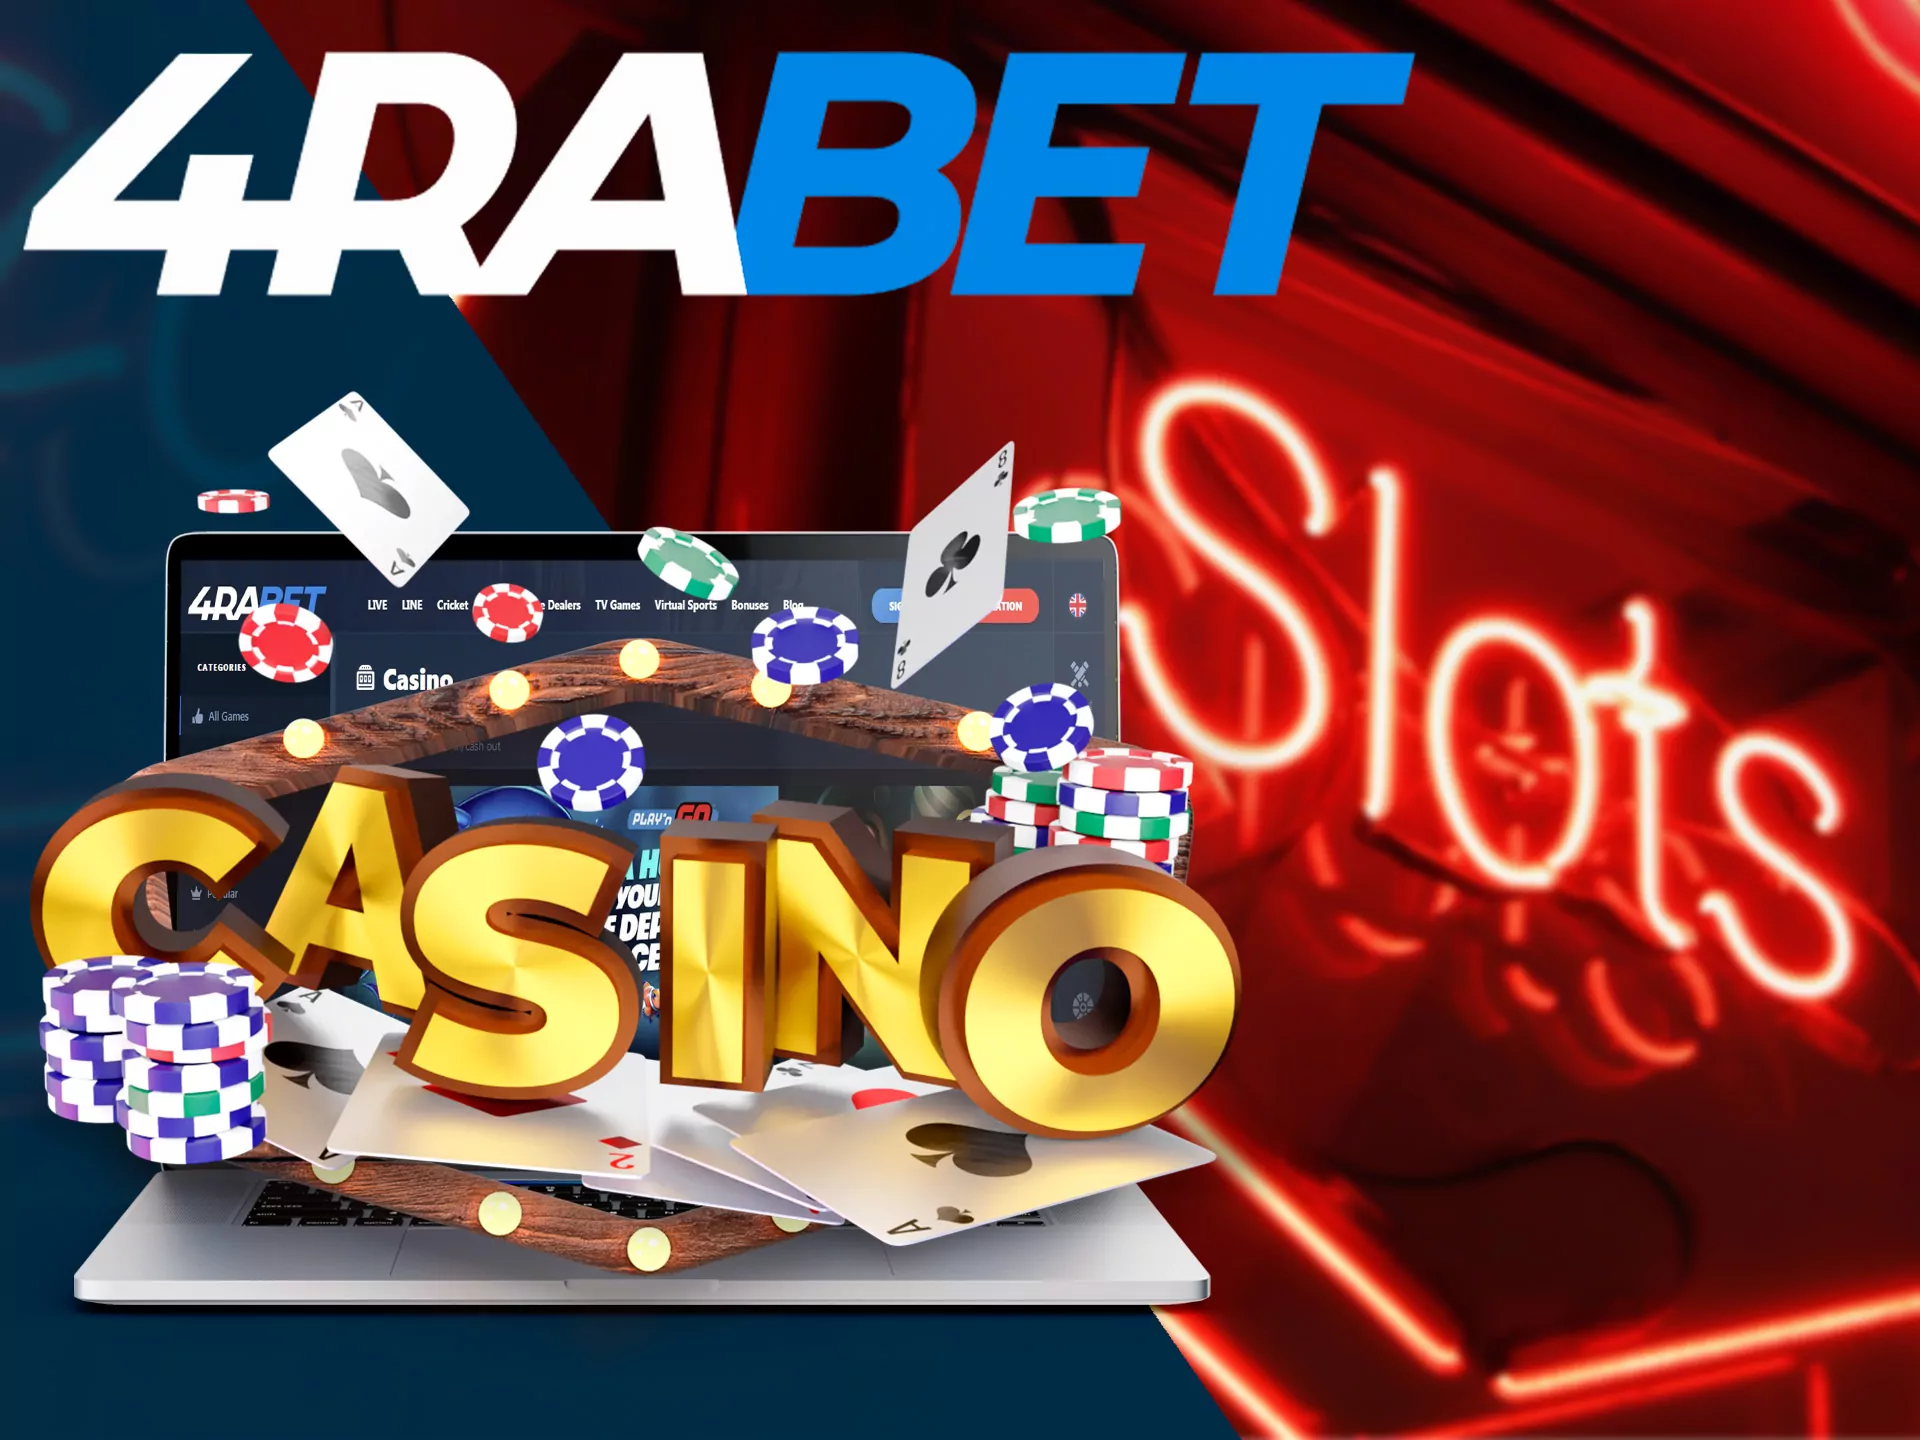 There are two casinos waiting for you at 4rabet: a live casino and a regular casino, this is a huge section, this article discusses all types of 4rabet gambling.